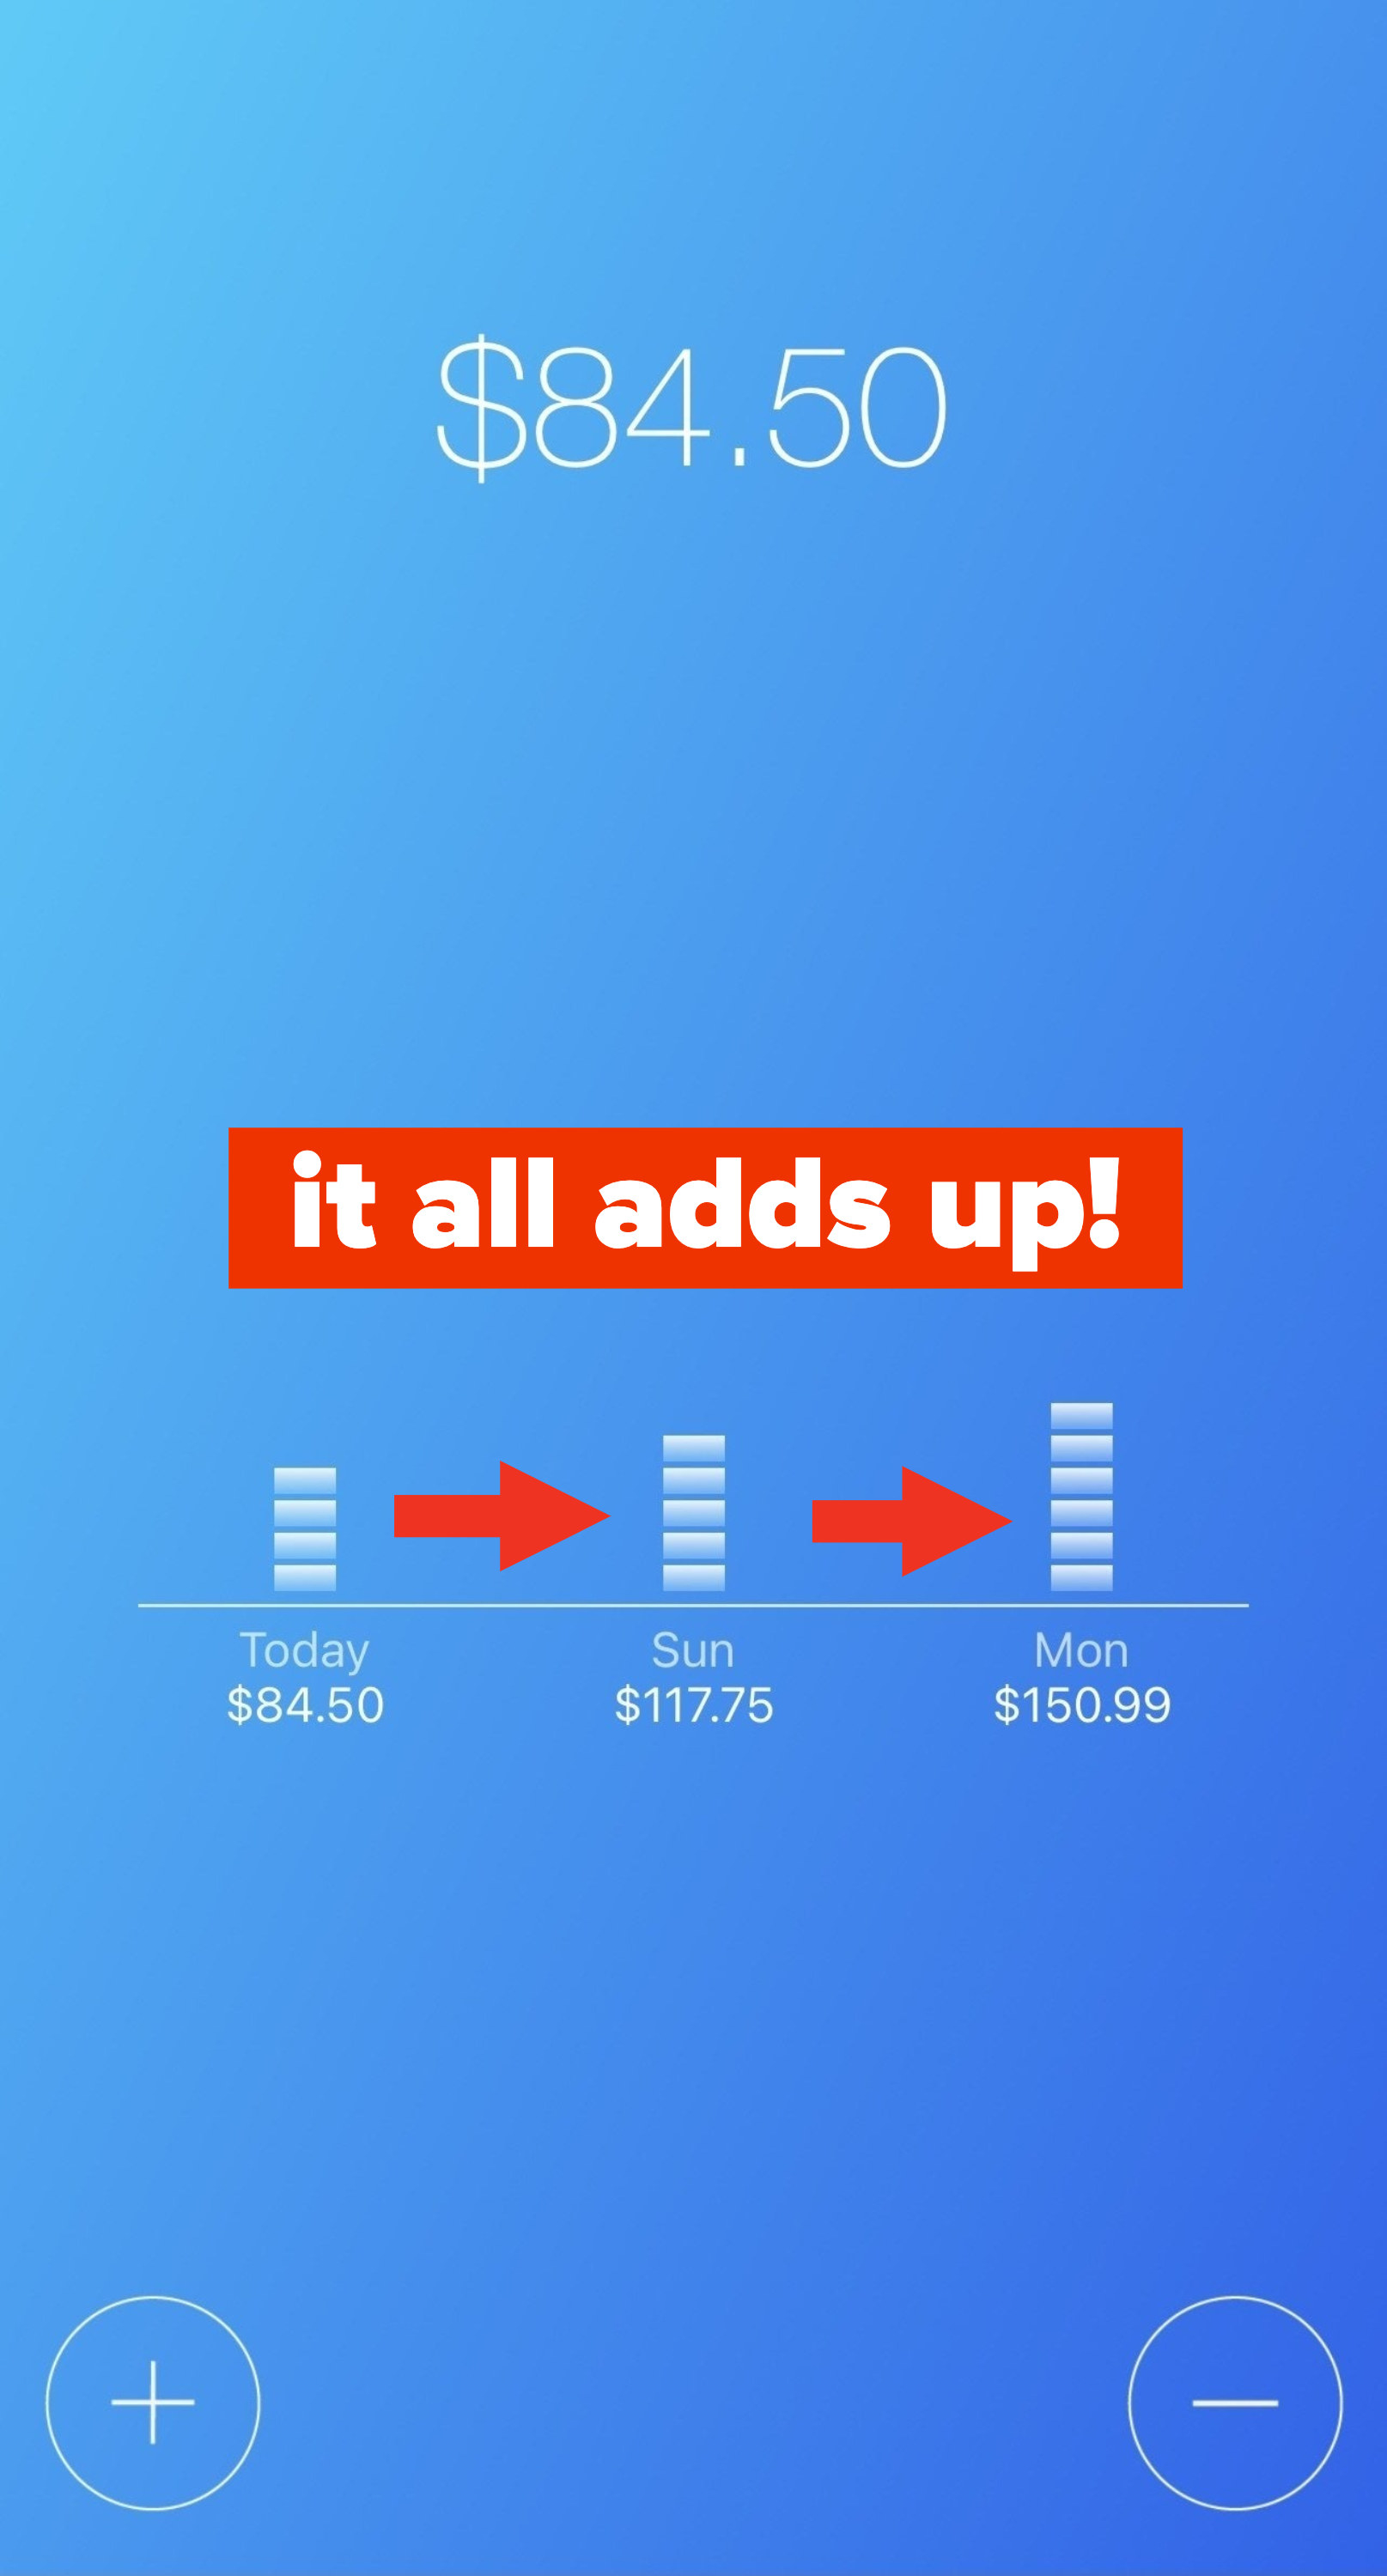 An app screenshot showing the daily amount increasing from $84.50 to $117.75 to $150.99